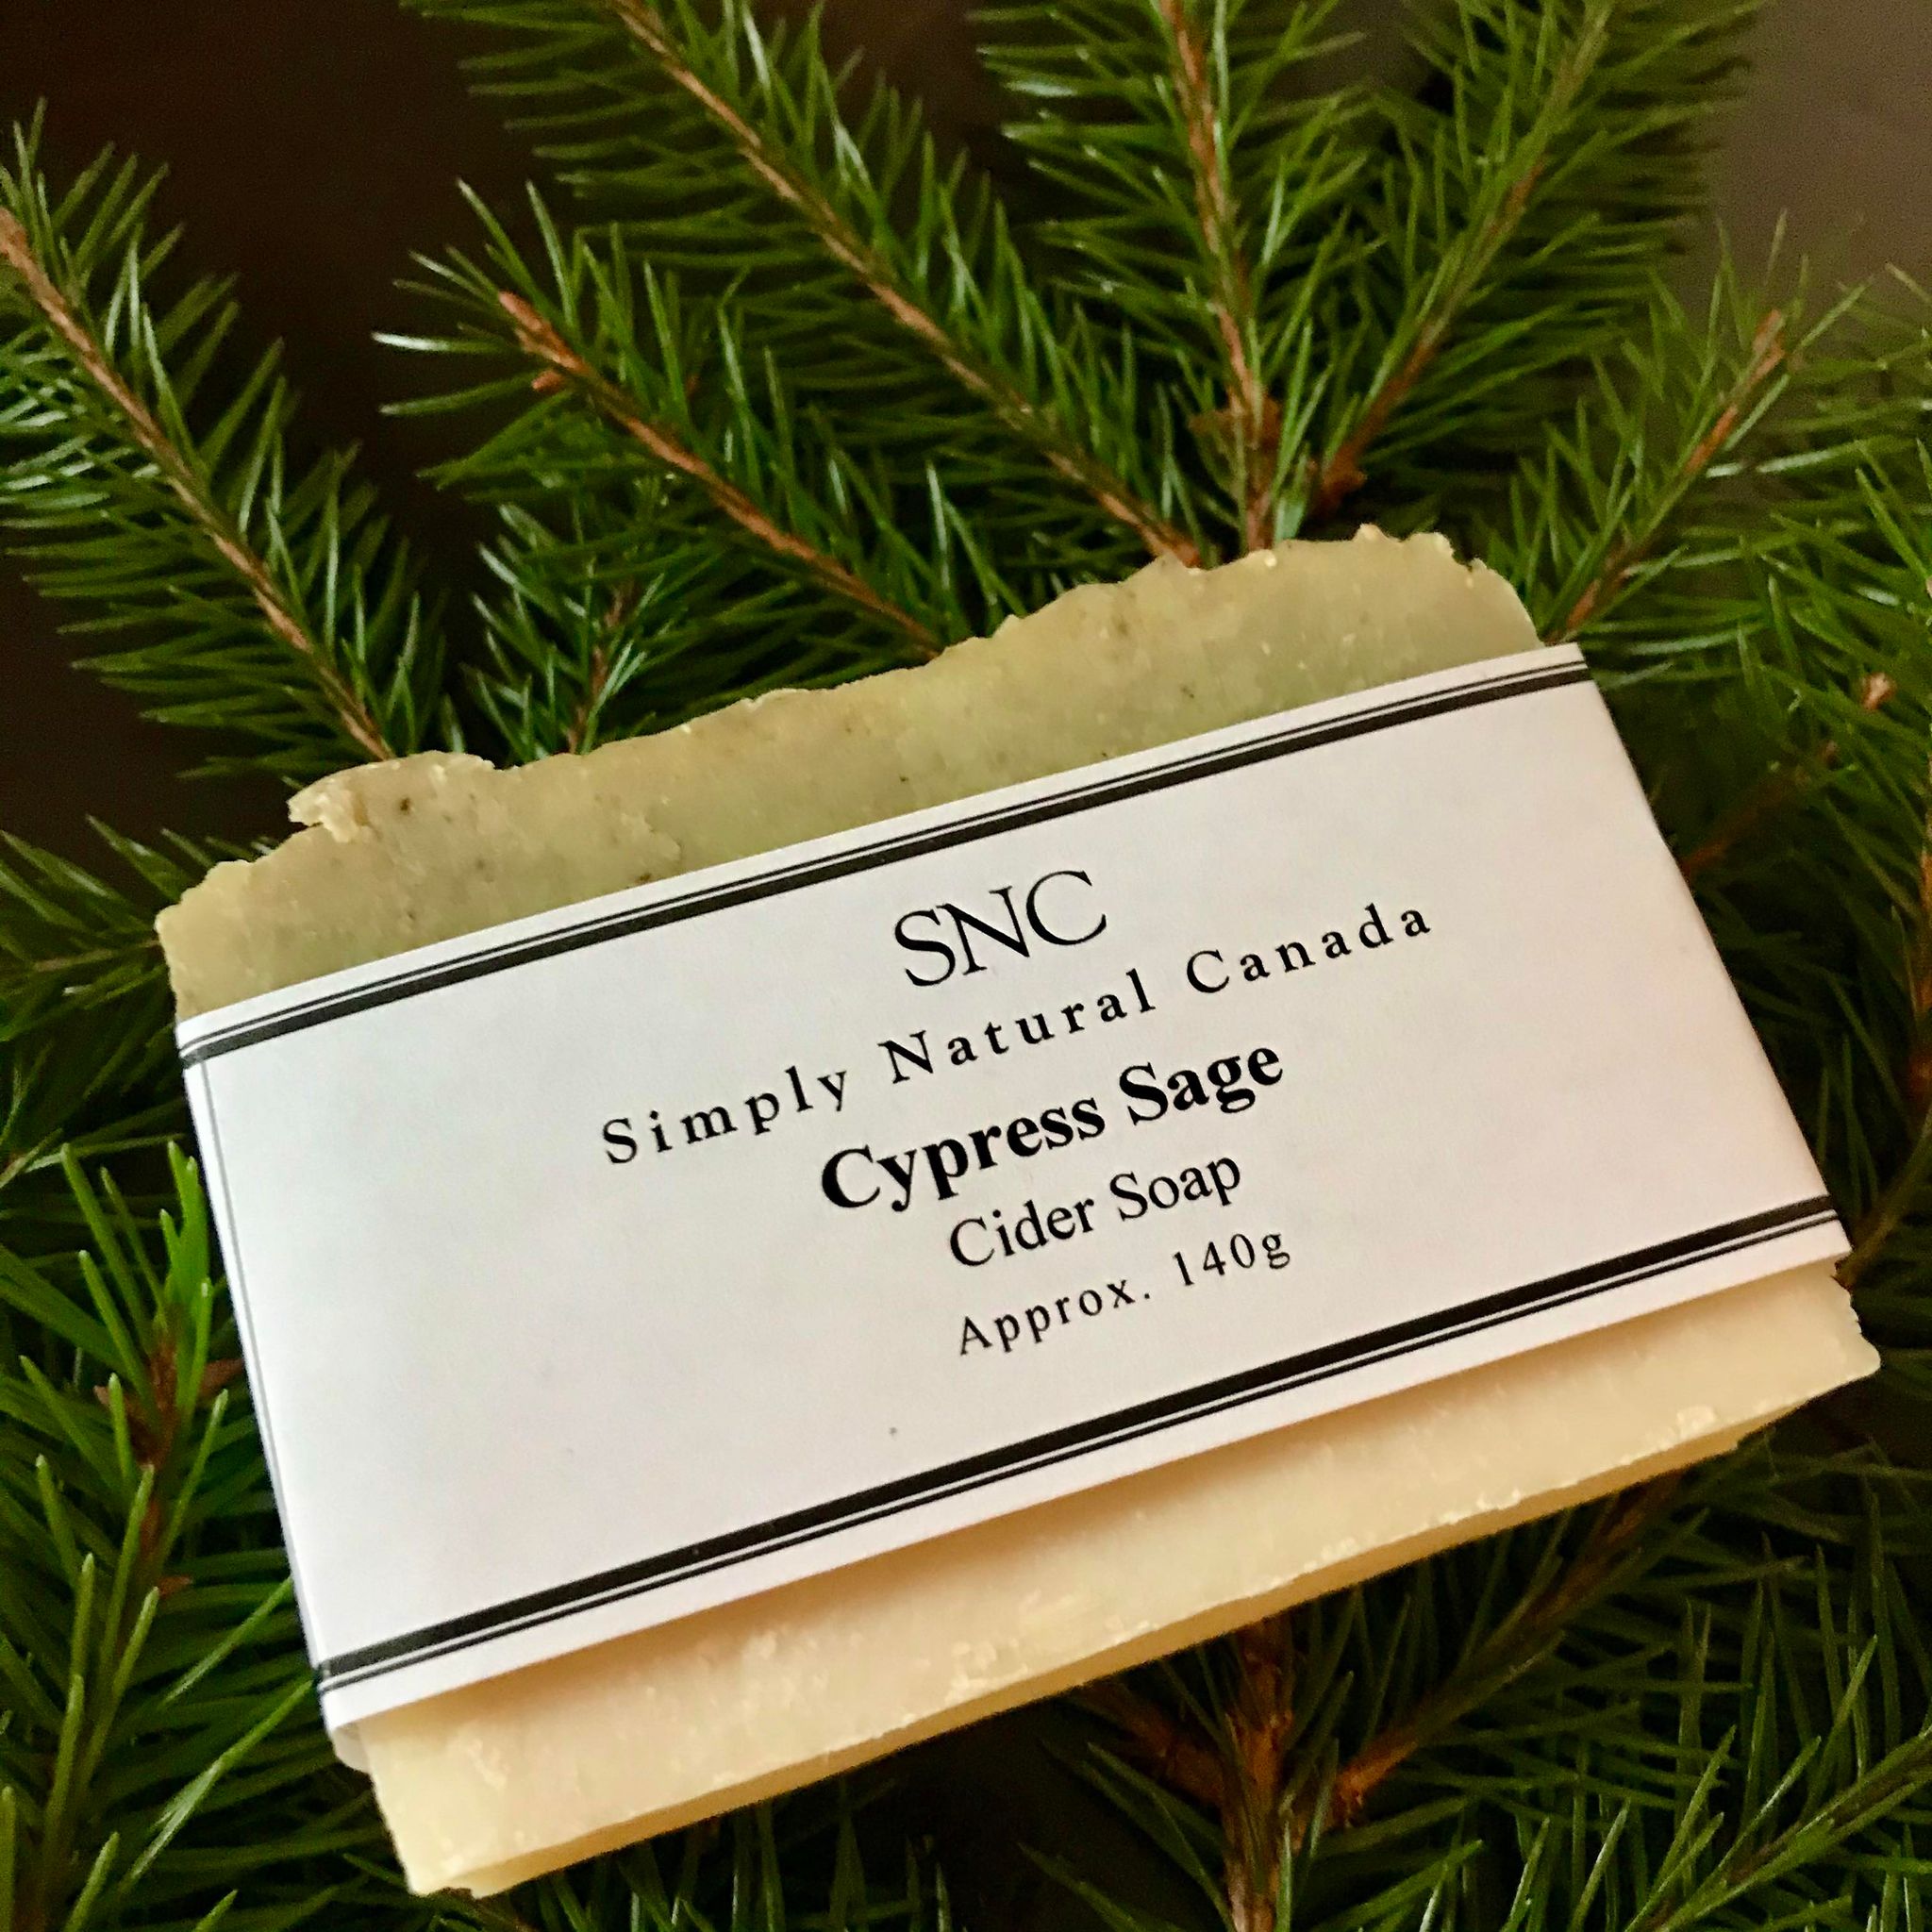 This Simply Natural Canada Cypress Sage cider soap is infused with the crisp essence of cypress, the earthy aroma of sage, and the sweet notes of cider.